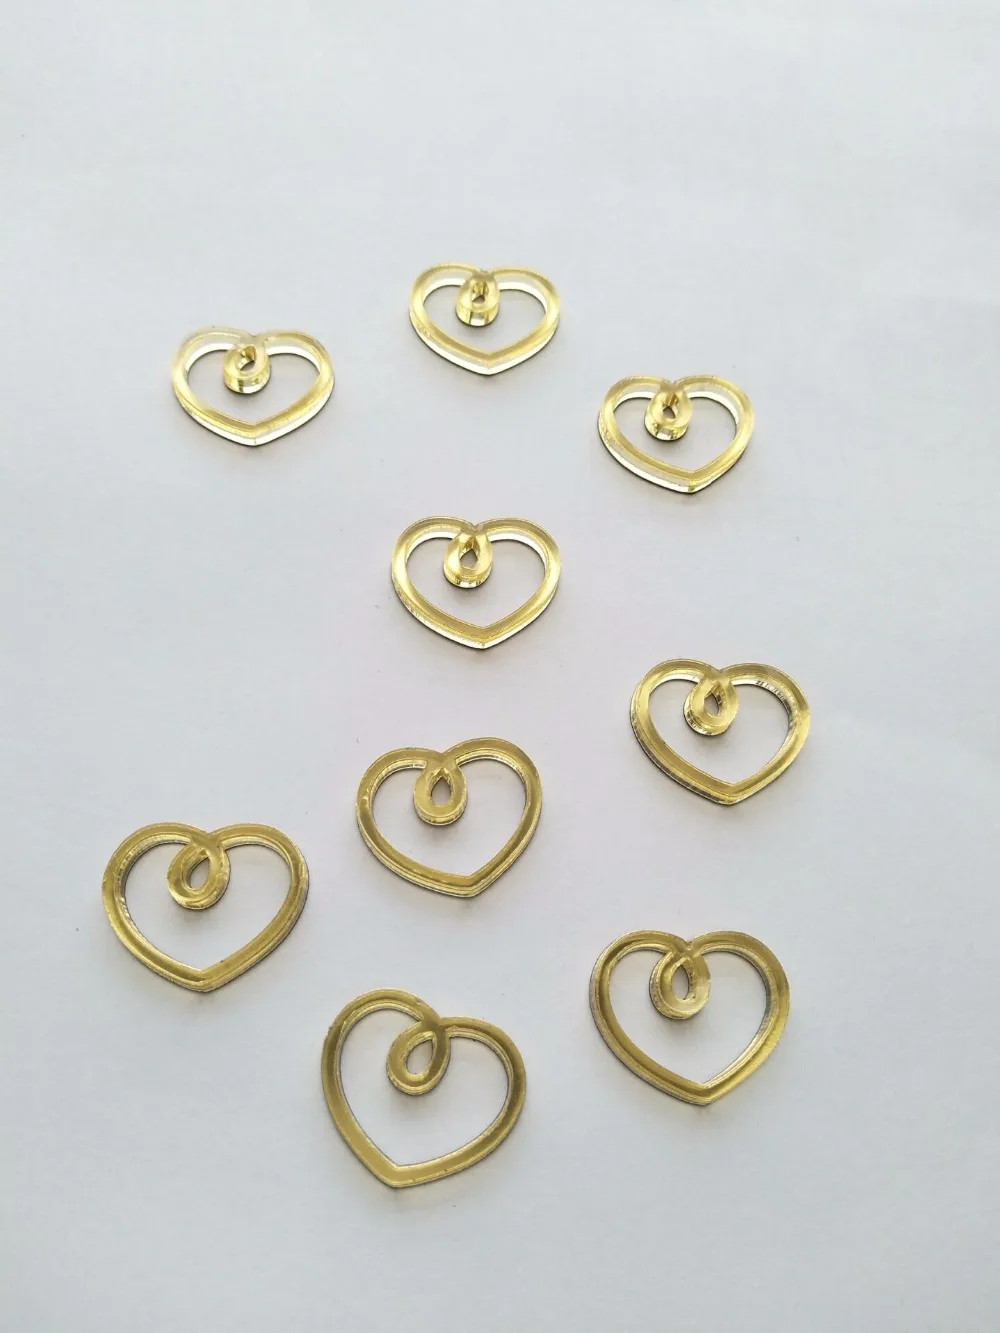 

MEYA 50PCS Of 2CM Mini Heart Mirror Sticker ,Cute Wall Mirror Decal For Crafts Scrapbooking Home Deco